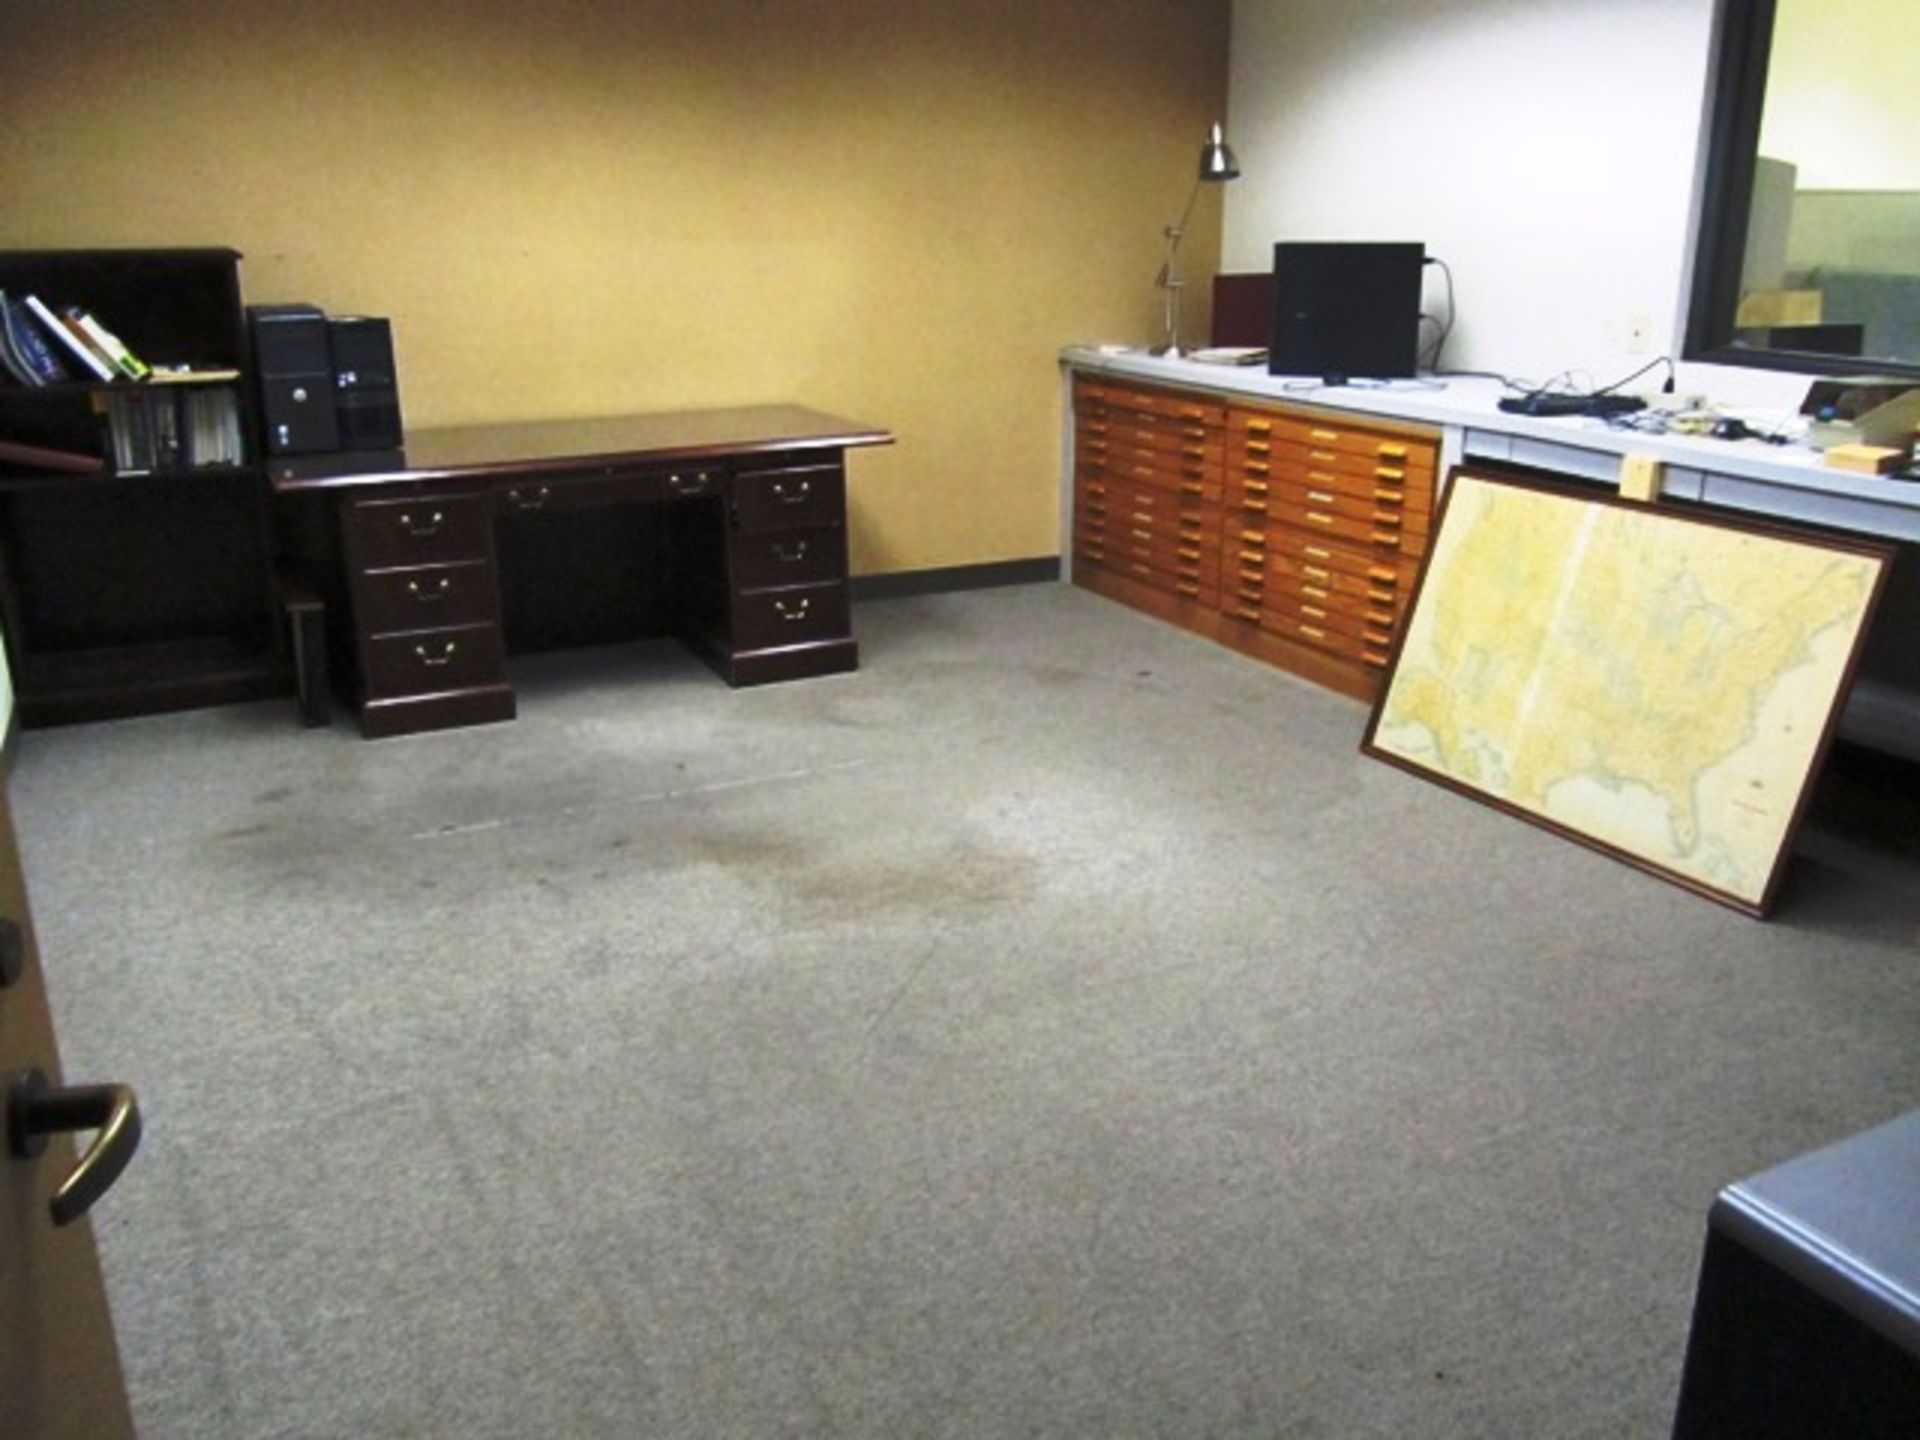 Contents of Office consisting of Desk, Chairs, Wood Blueprint Cabinets